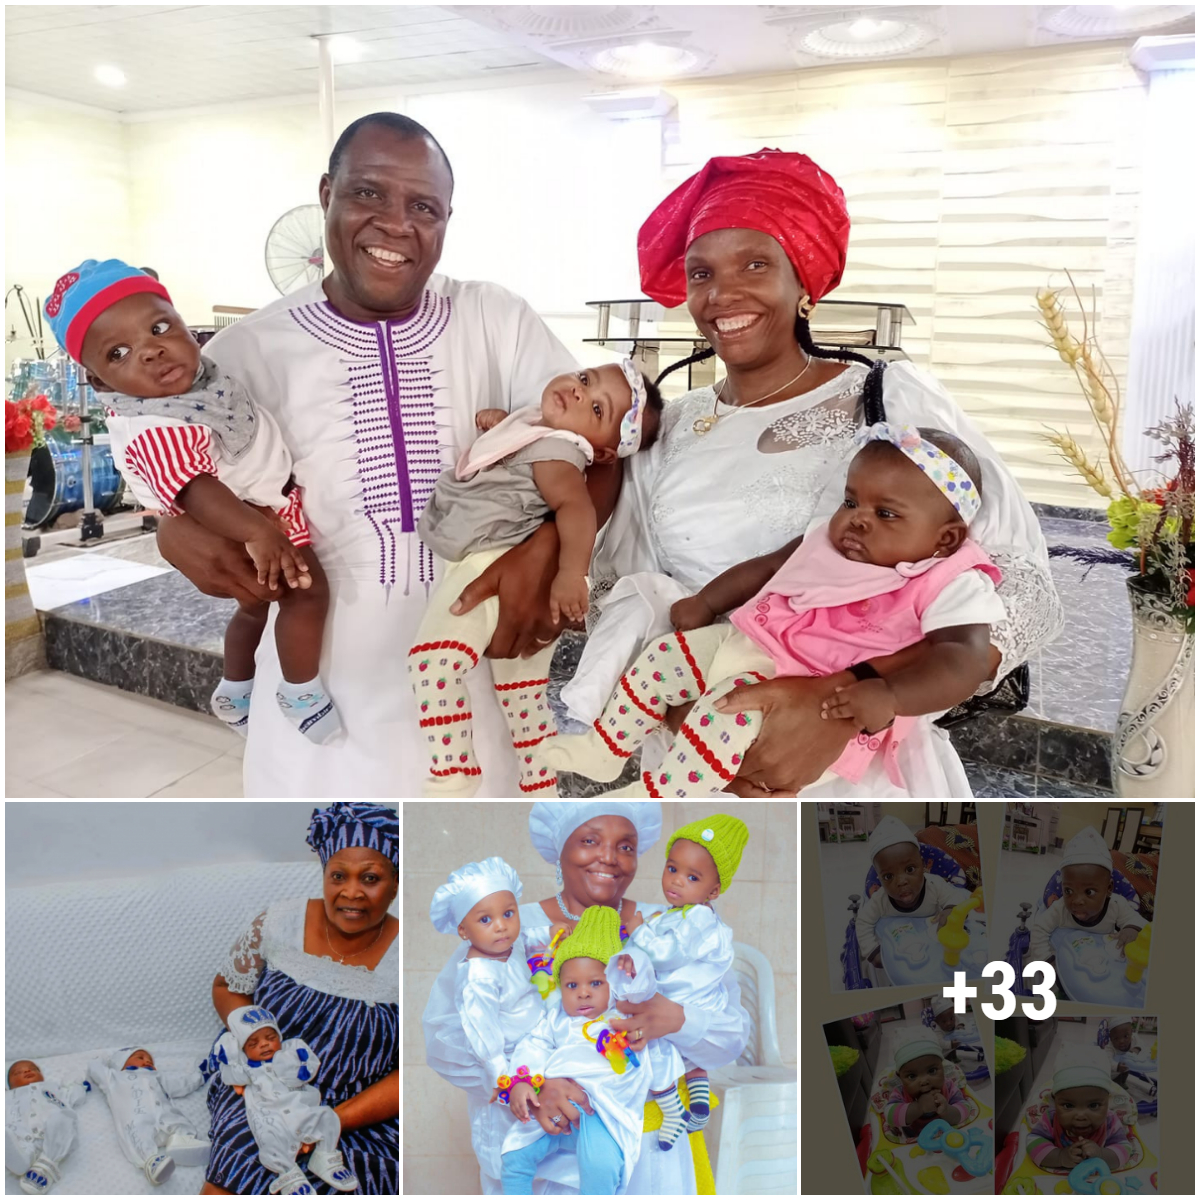 Tears of Joy and Glory: A Nigerian Woman’s Surveillance on Her 17-Year Journey to Welcome Her Baby After 7 Tragic Miscarriages